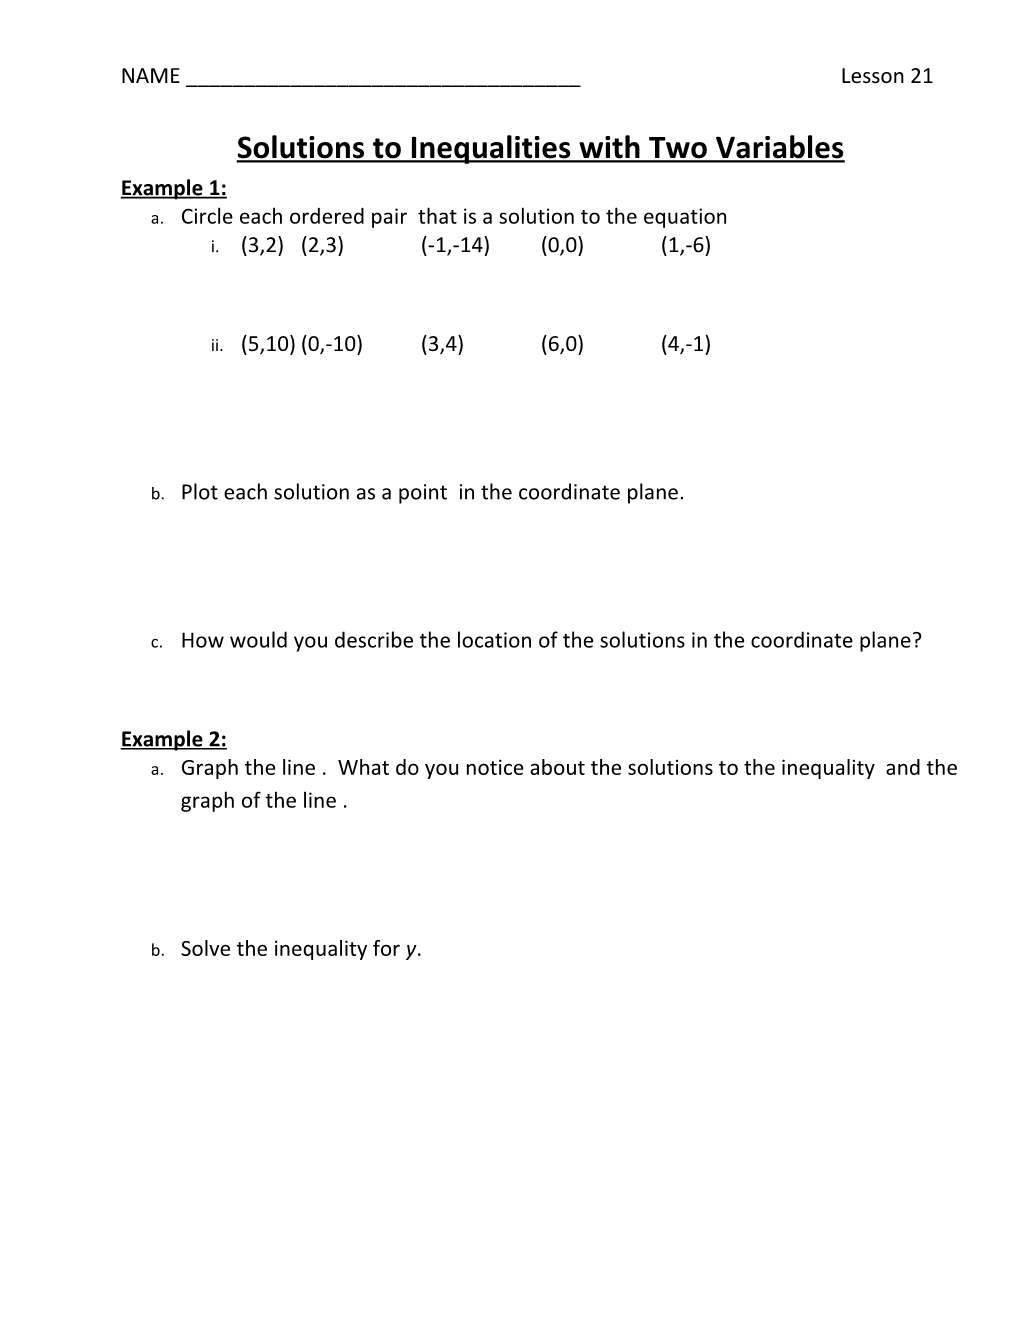 Solutions to Inequalities with Two Variables